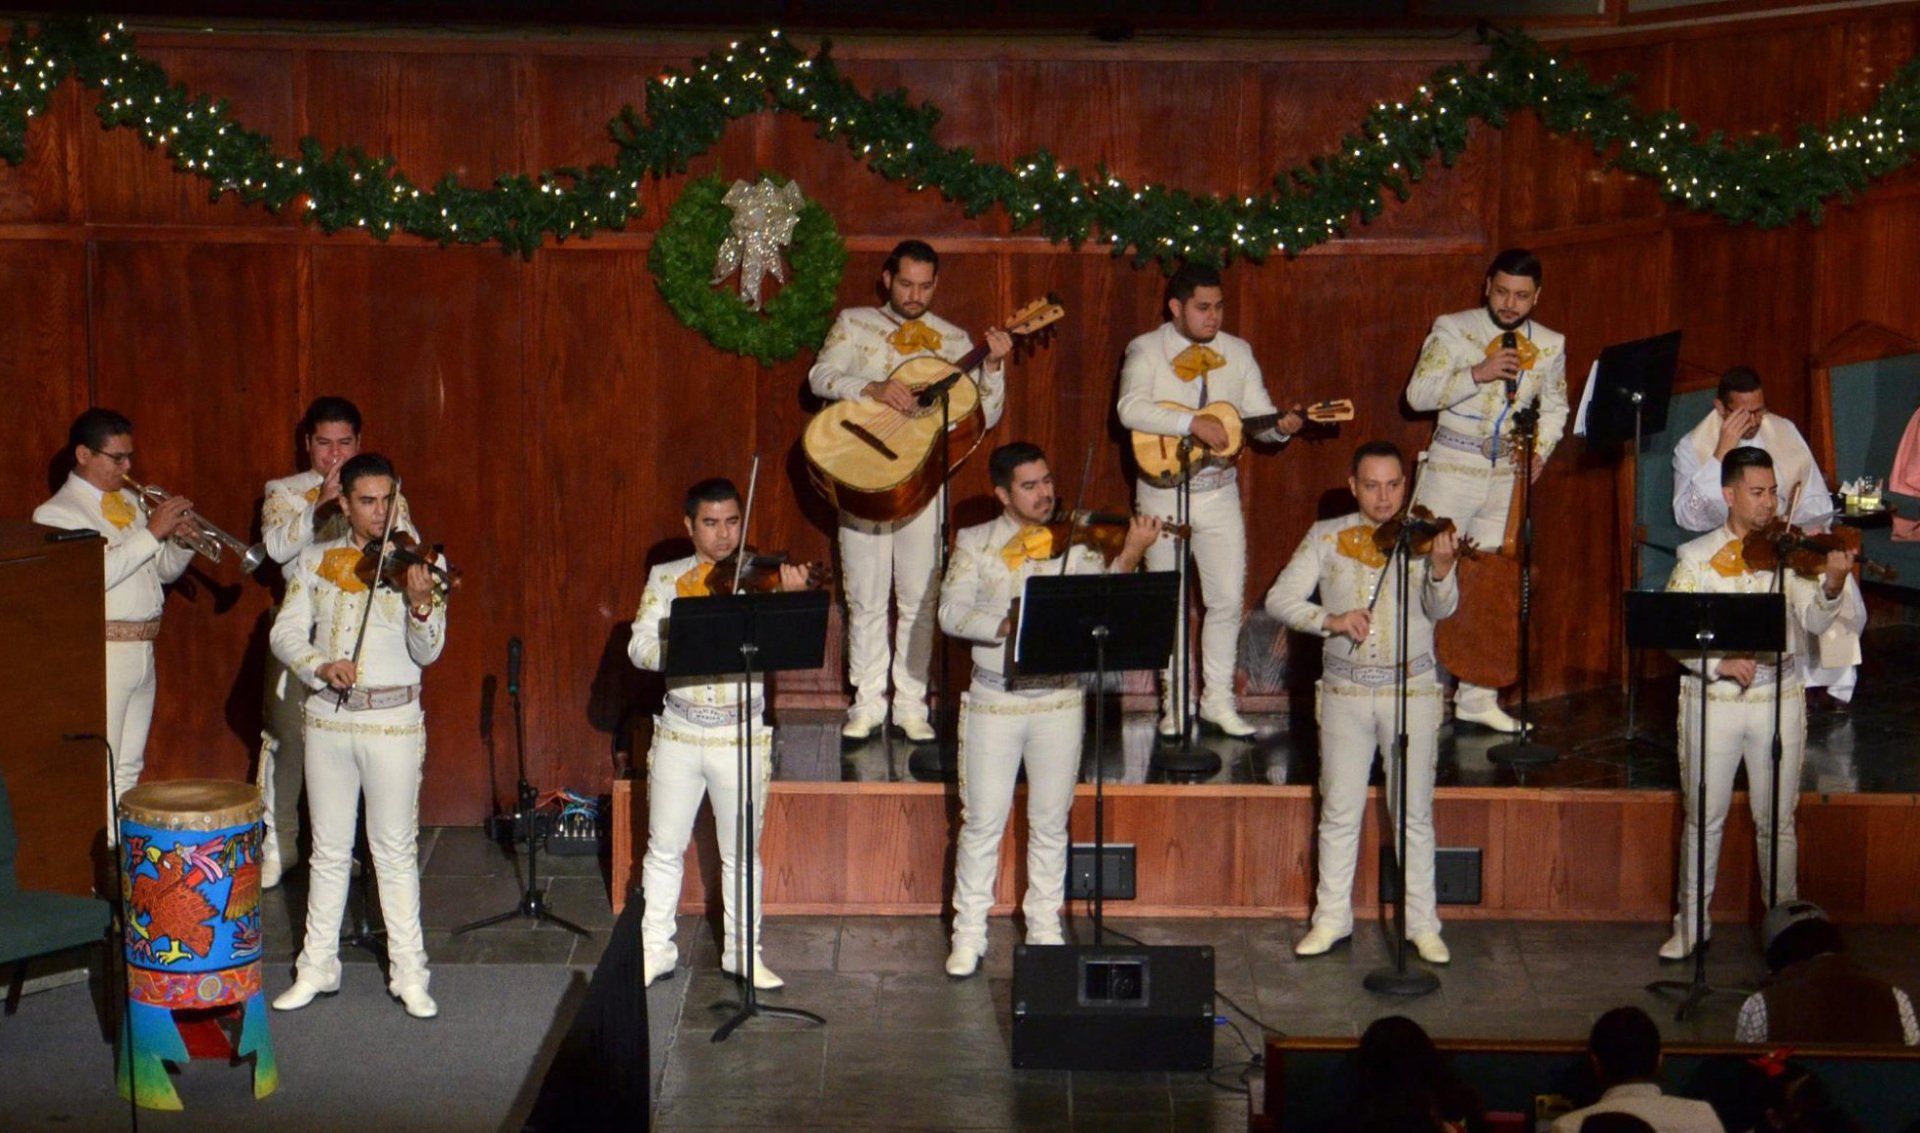 Mariachi Band during Christmas Service